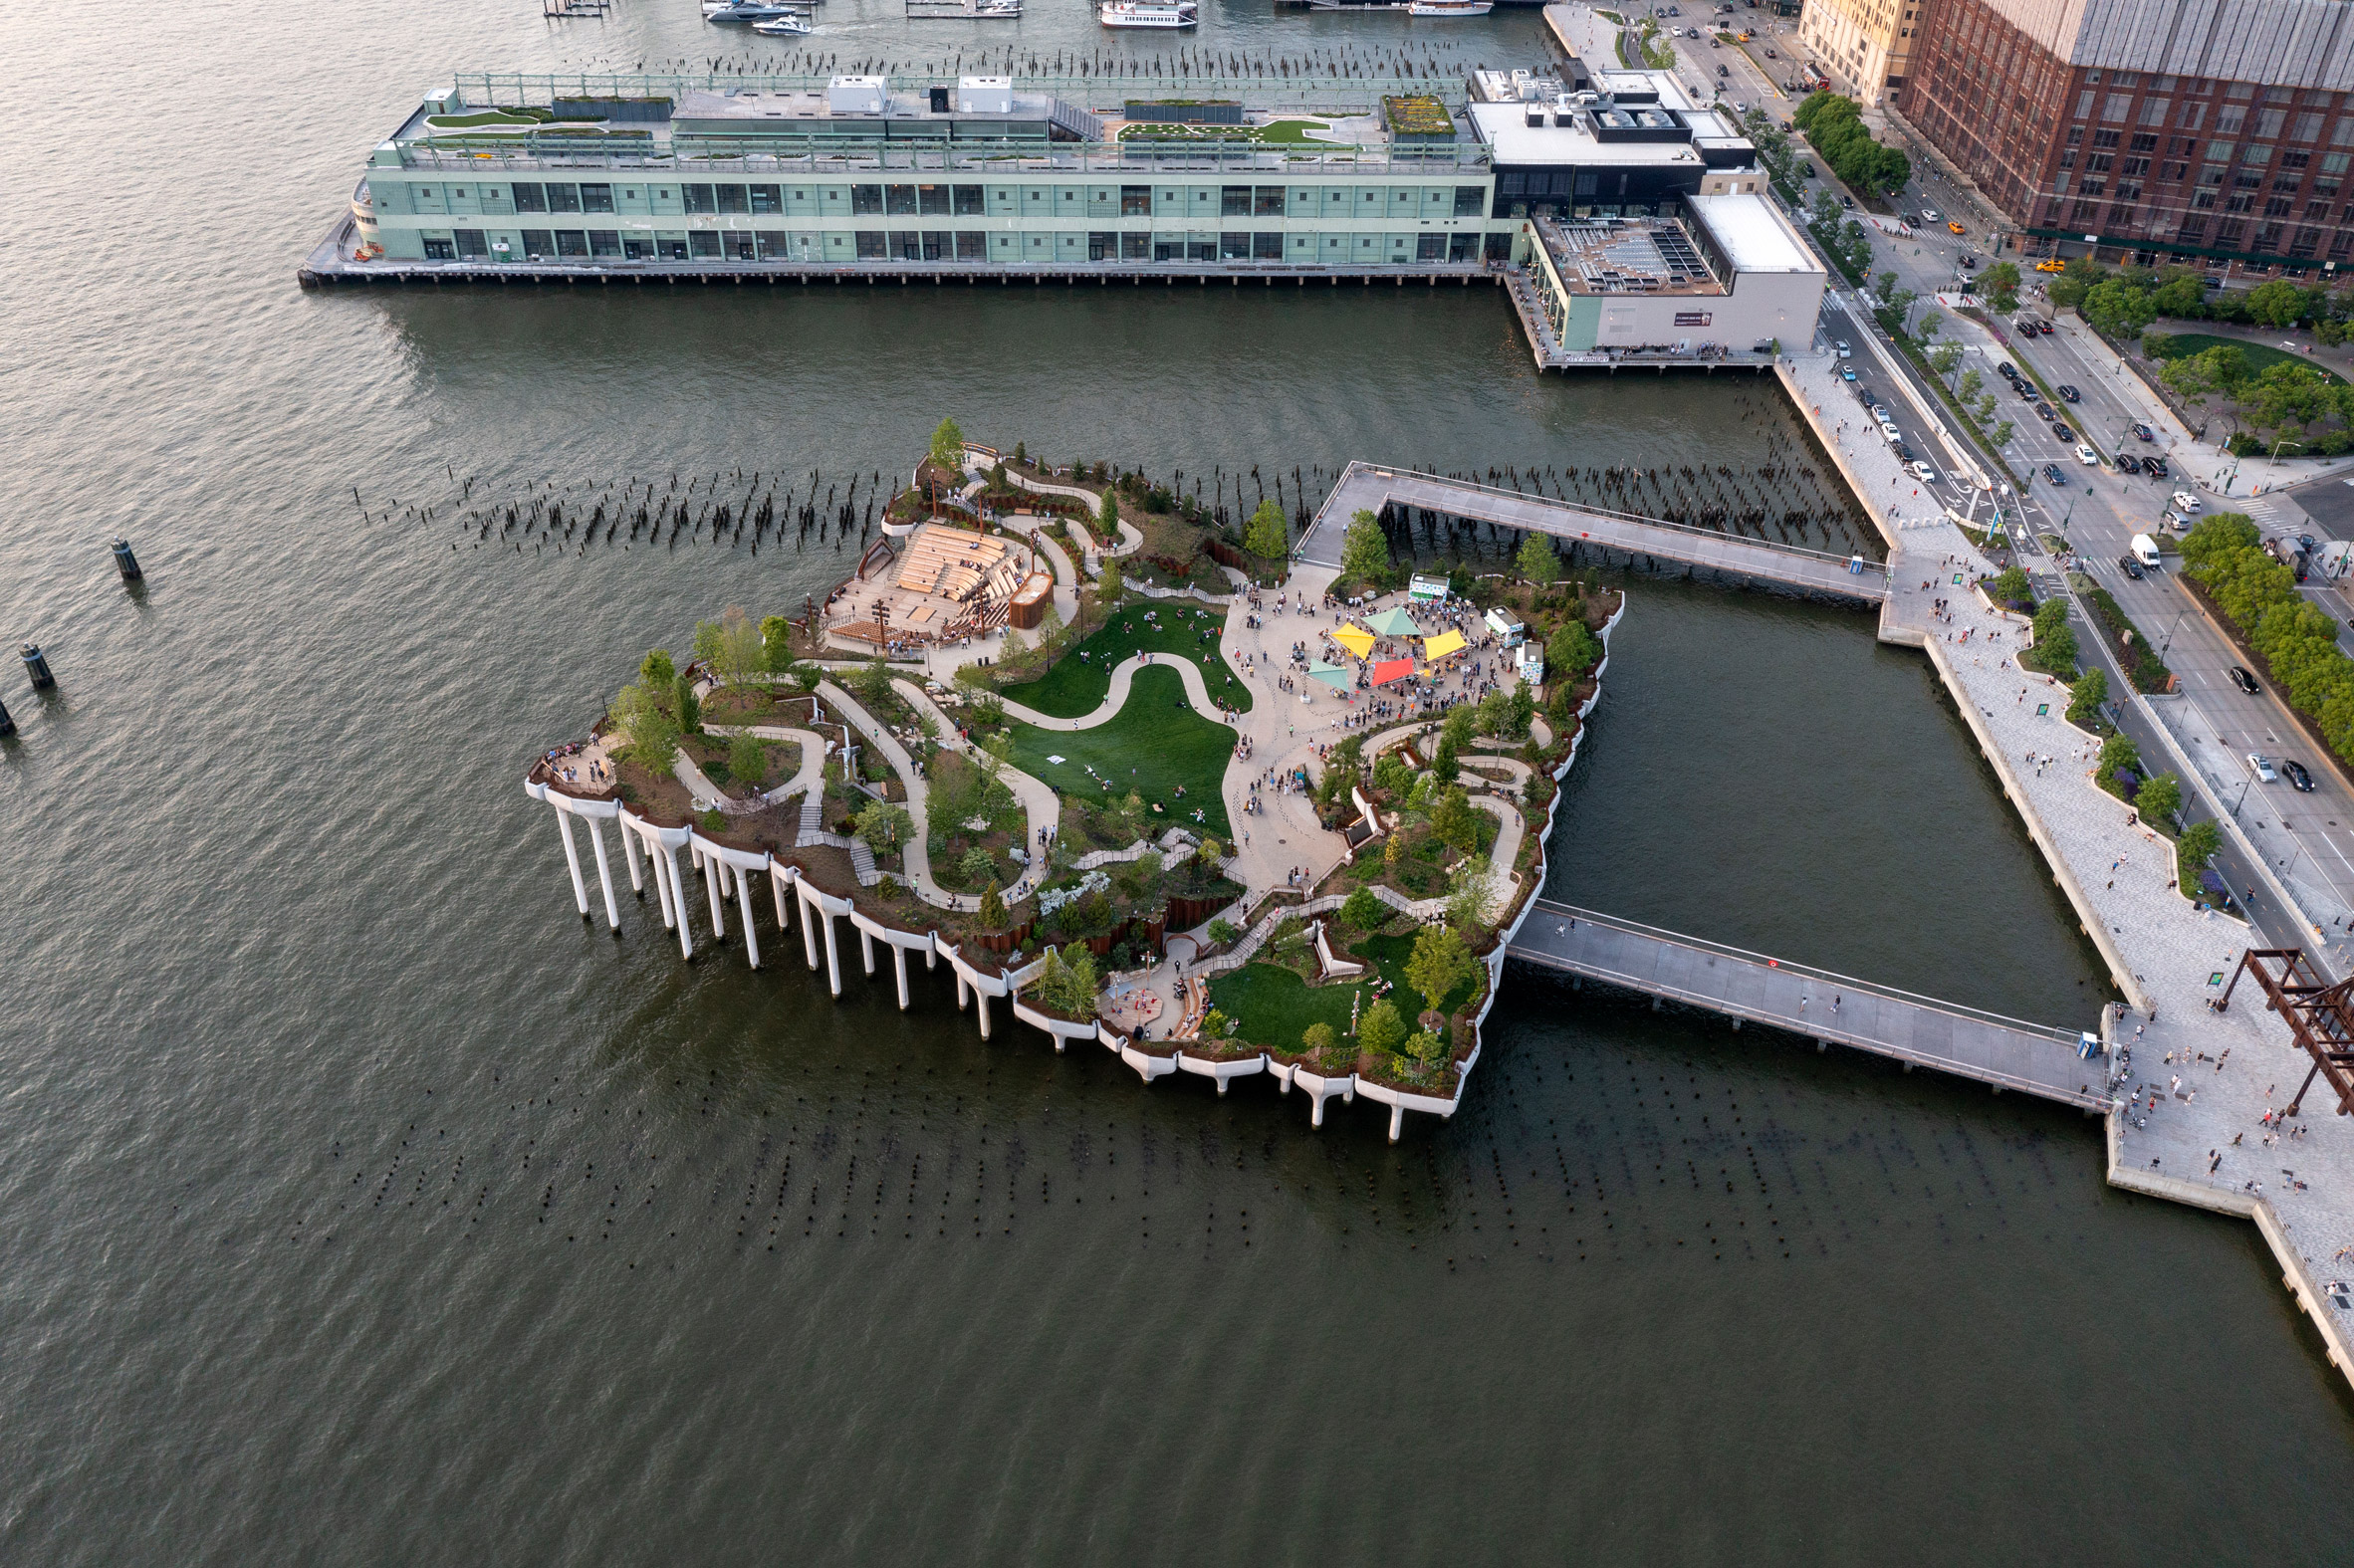 Little Island over the Hudson River in New York